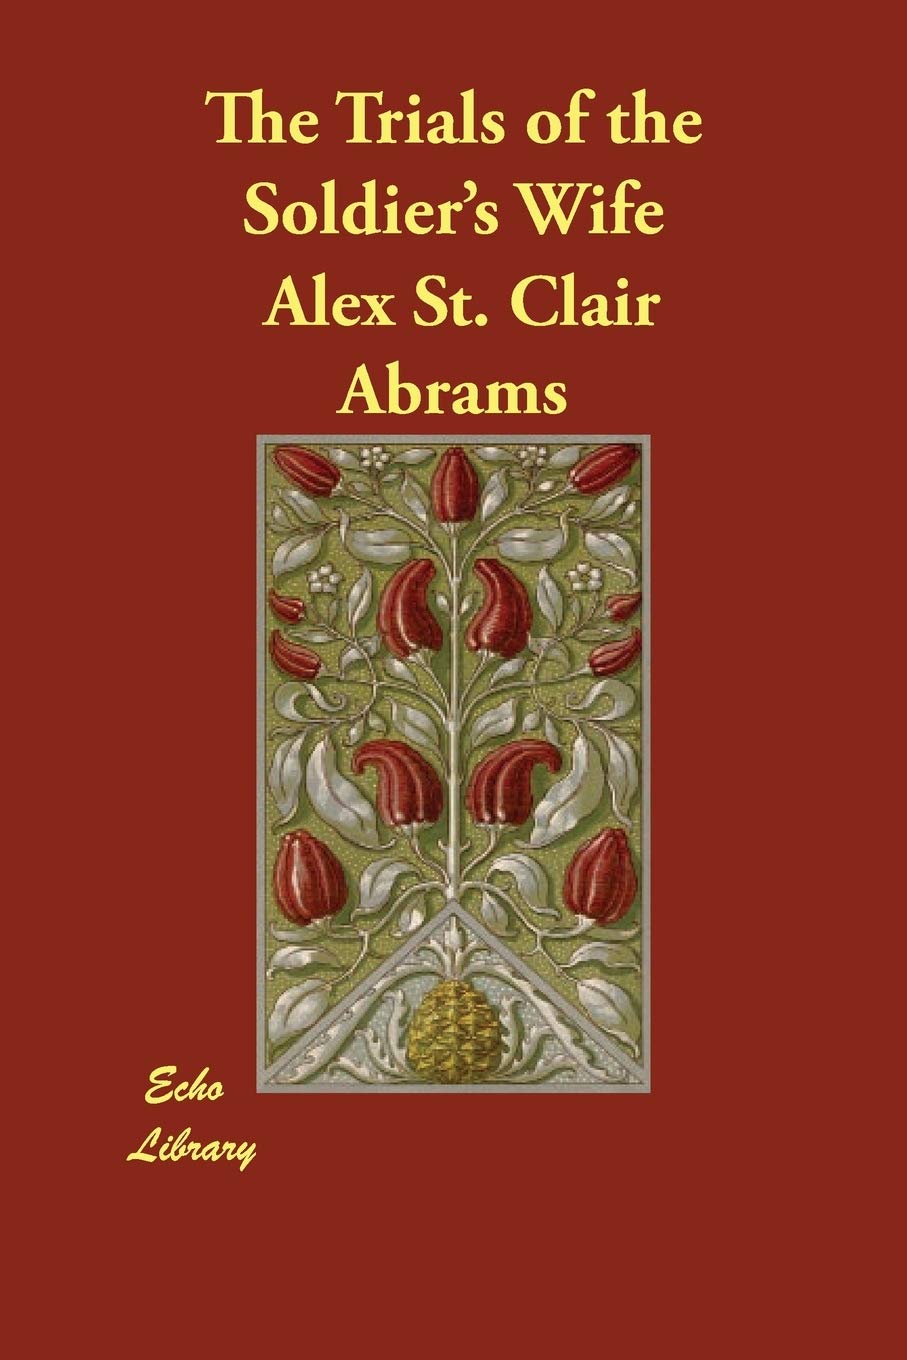 The Trials of the Soldier's Wif - Alex St.Clair Abrams